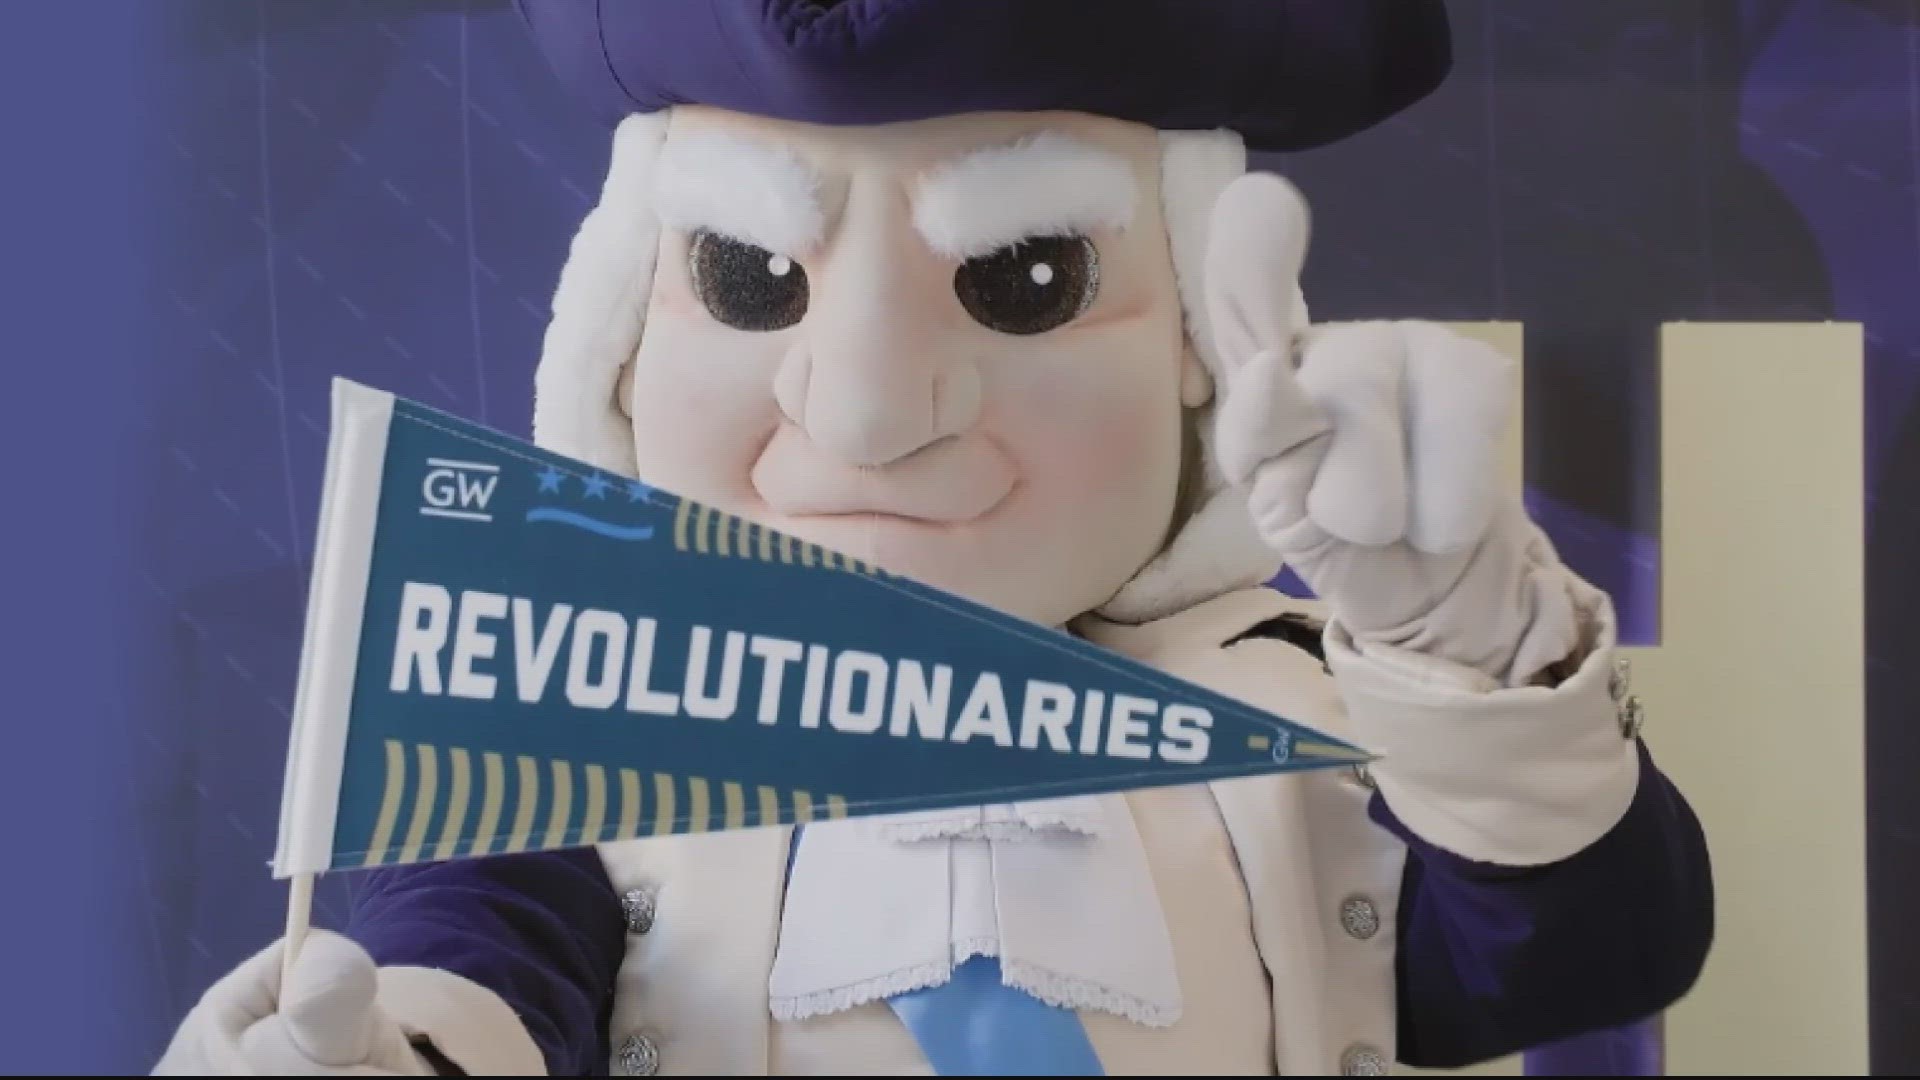 Drum roll please, George Washington University officially has a new nickname. Say hello to the Revolutionaries.